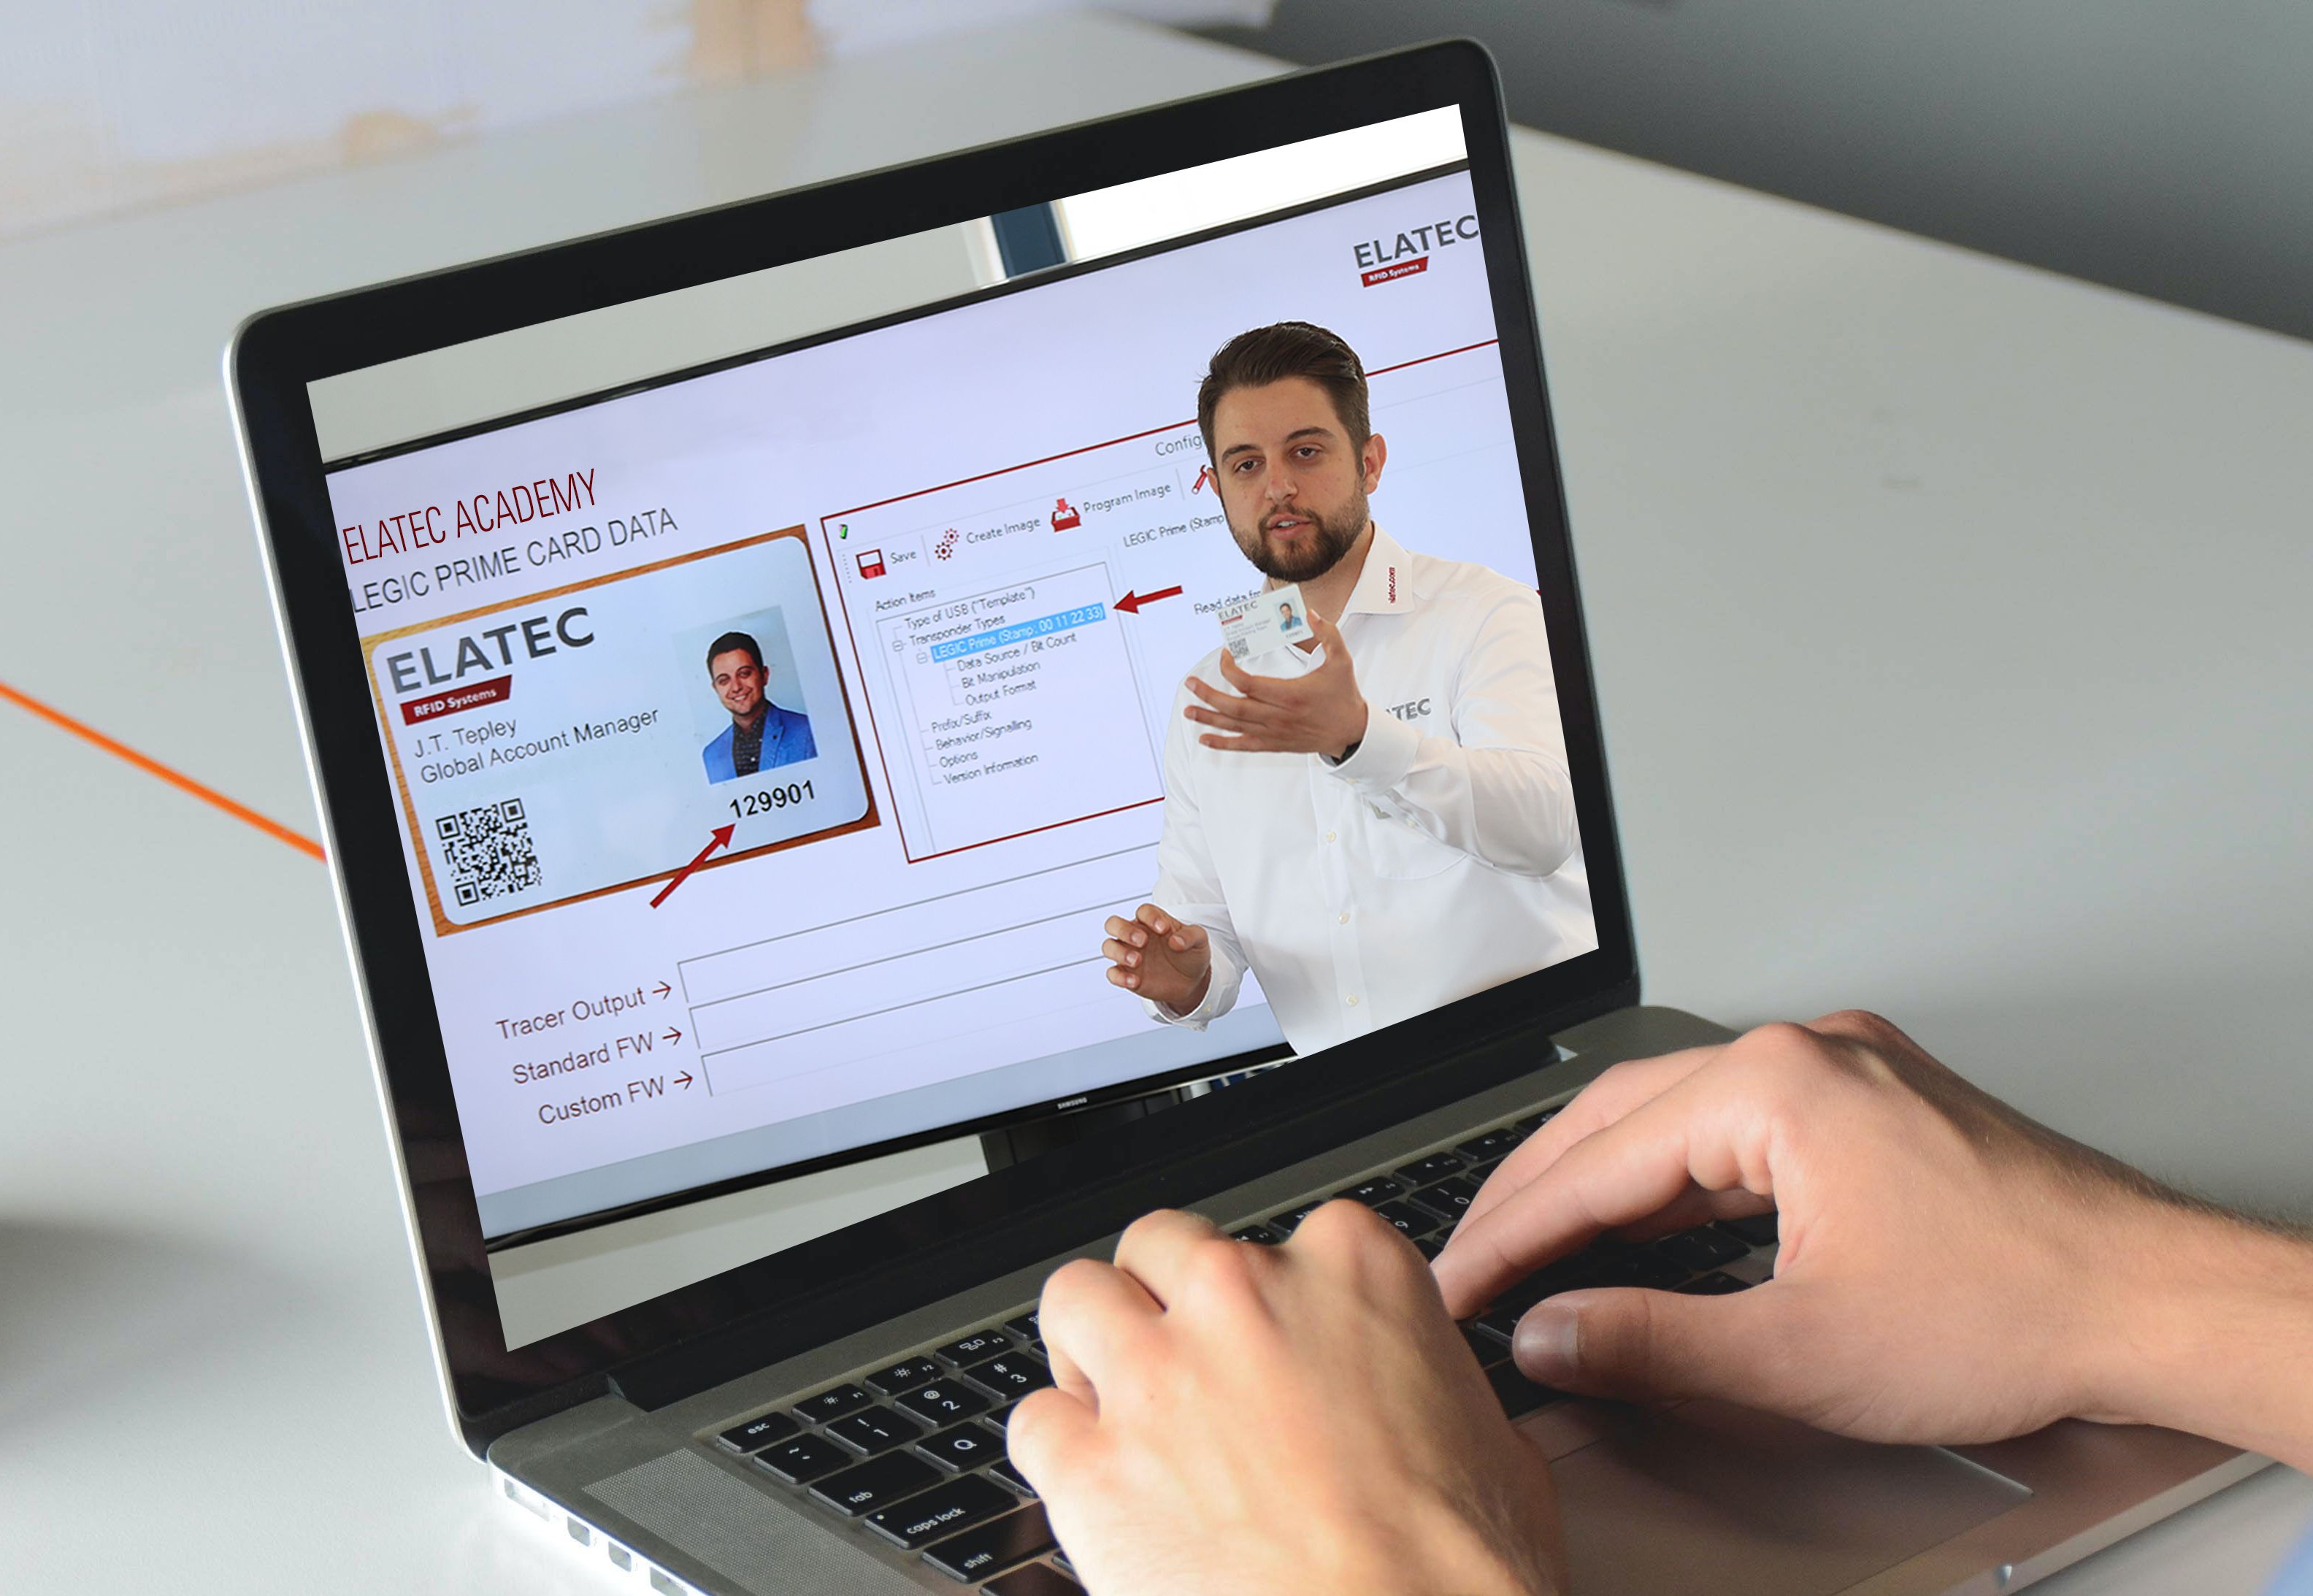 The ELATEC Academy introduces basic and advanced topics in authentication and access control technologies.